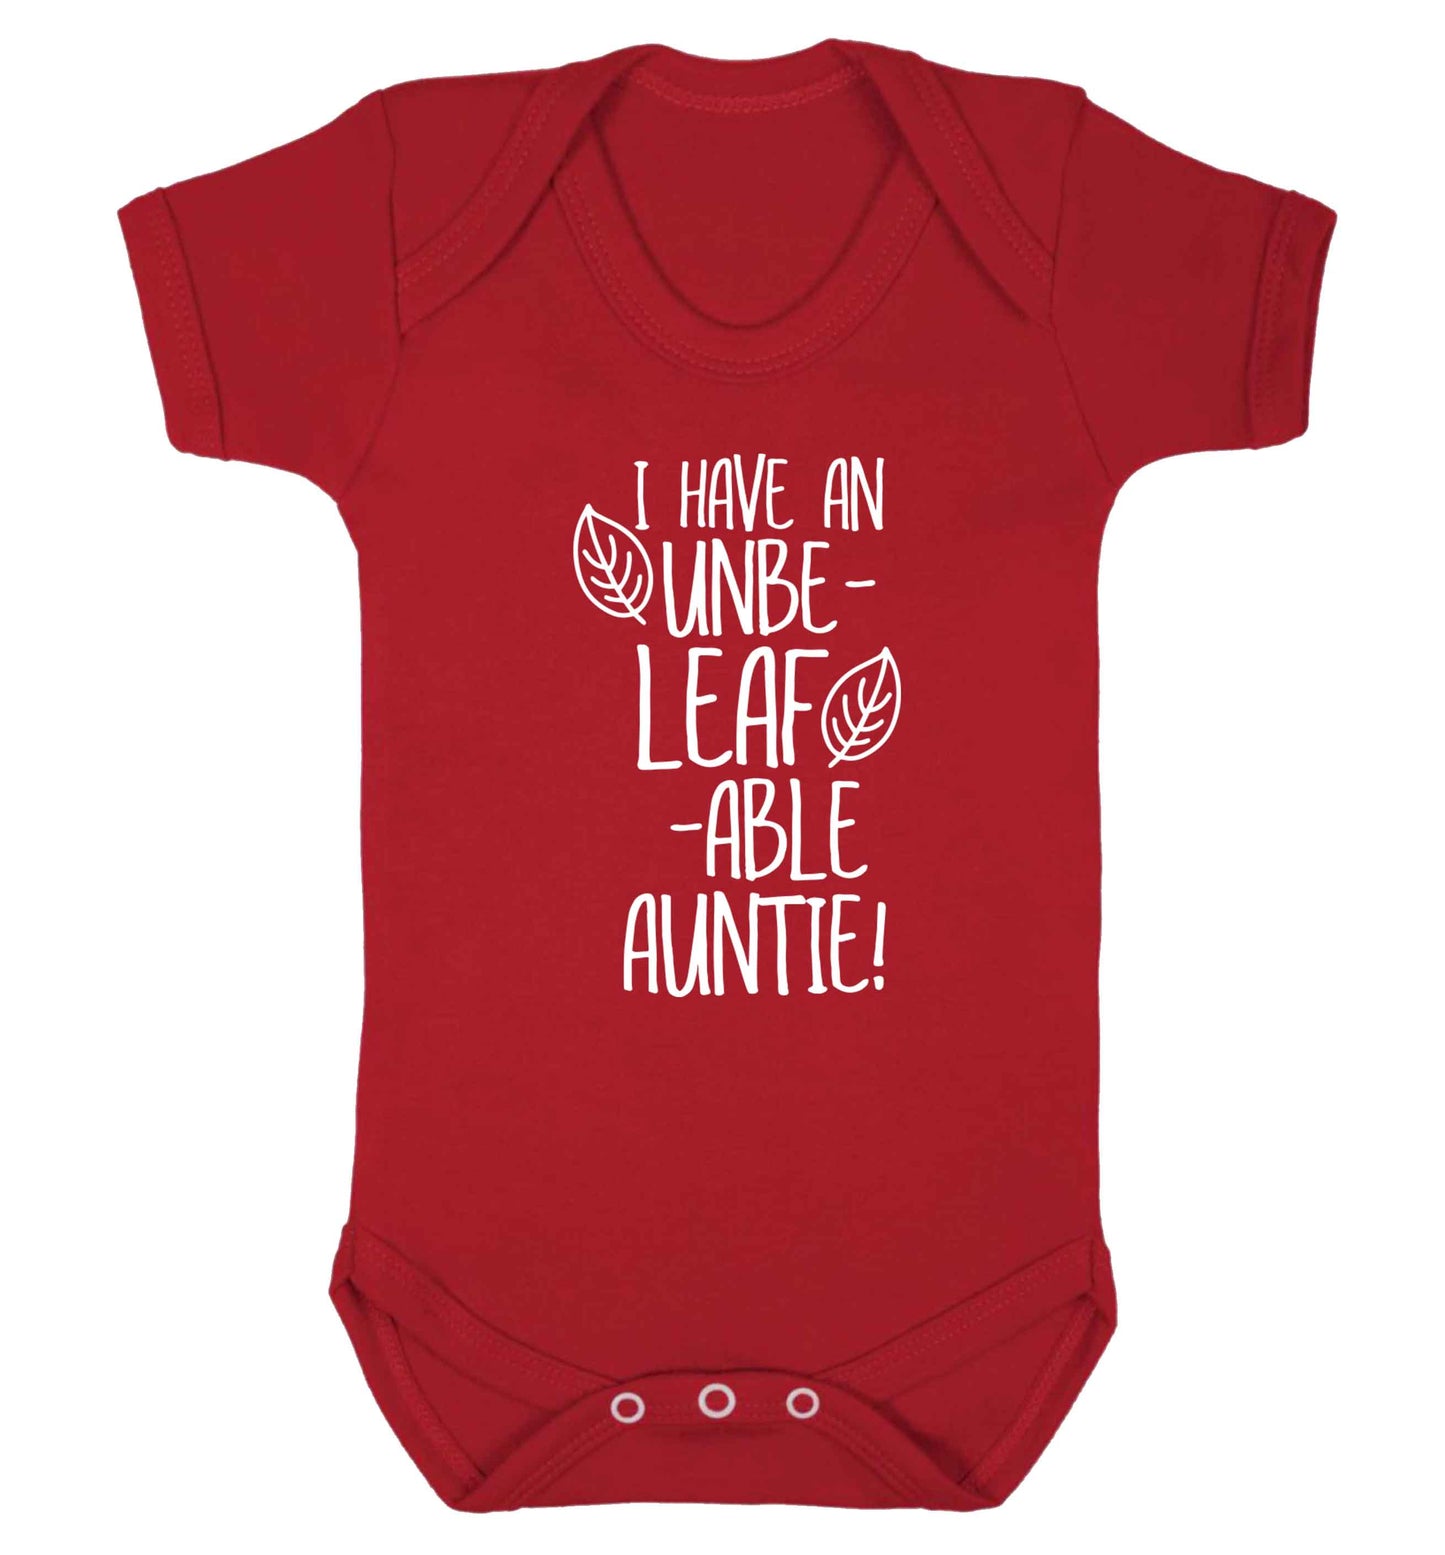 I have an unbe-leaf-able auntie Baby Vest red 18-24 months